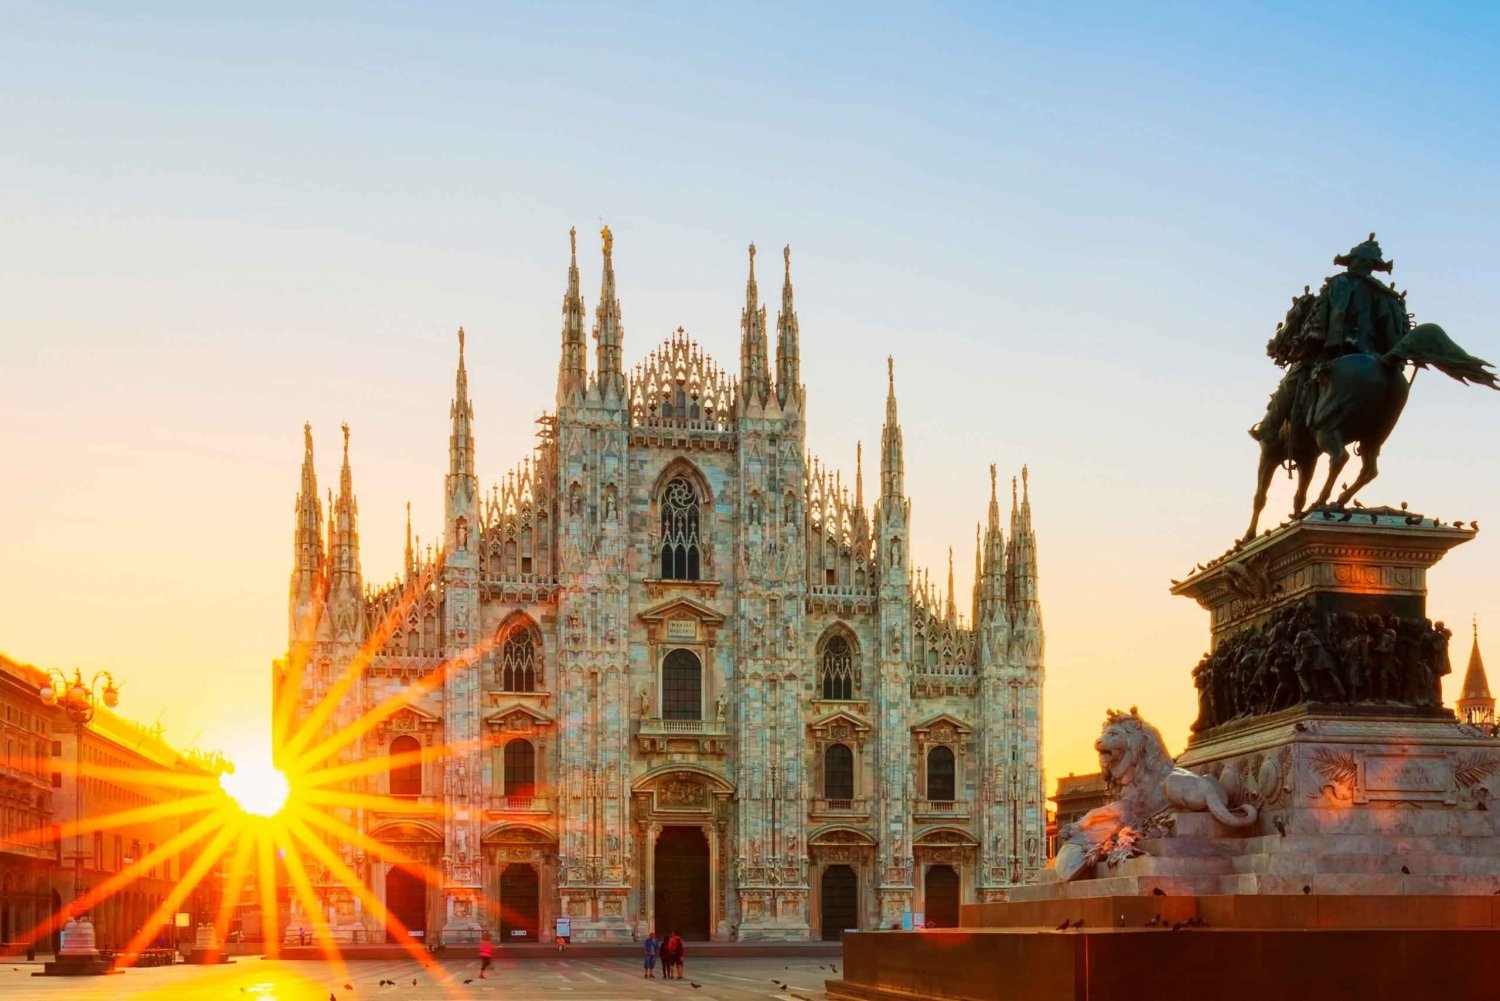 Milan: Guided Walking Tour with Duomo and the Last Supper